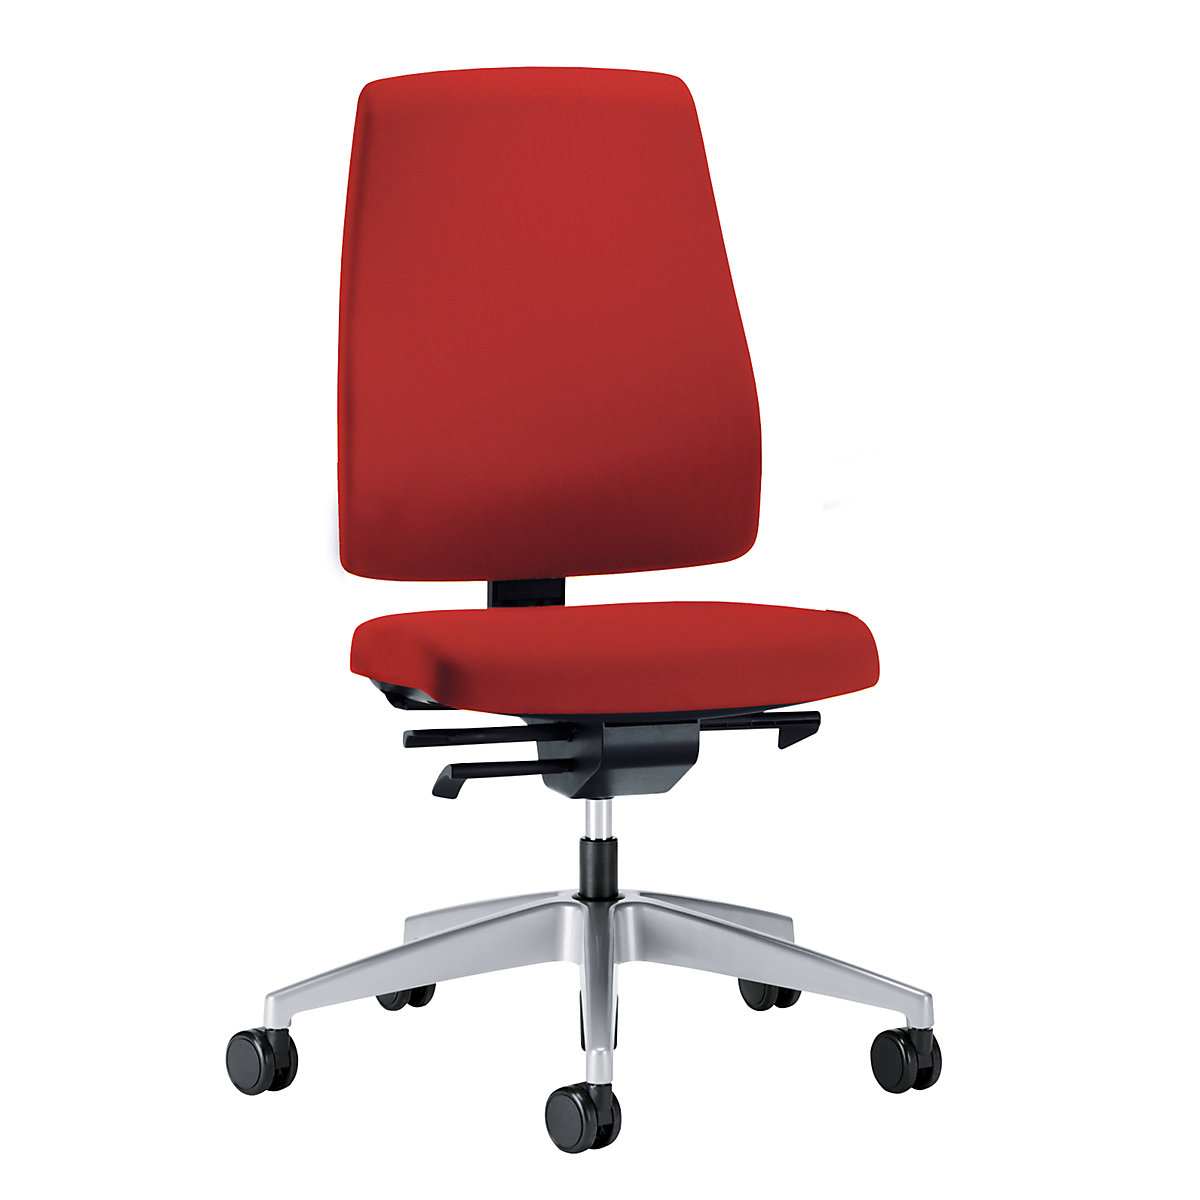 GOAL office swivel chair, back rest height 530 mm – interstuhl, brilliant silver frame, with hard castors, flame red, seat depth 410 mm-4